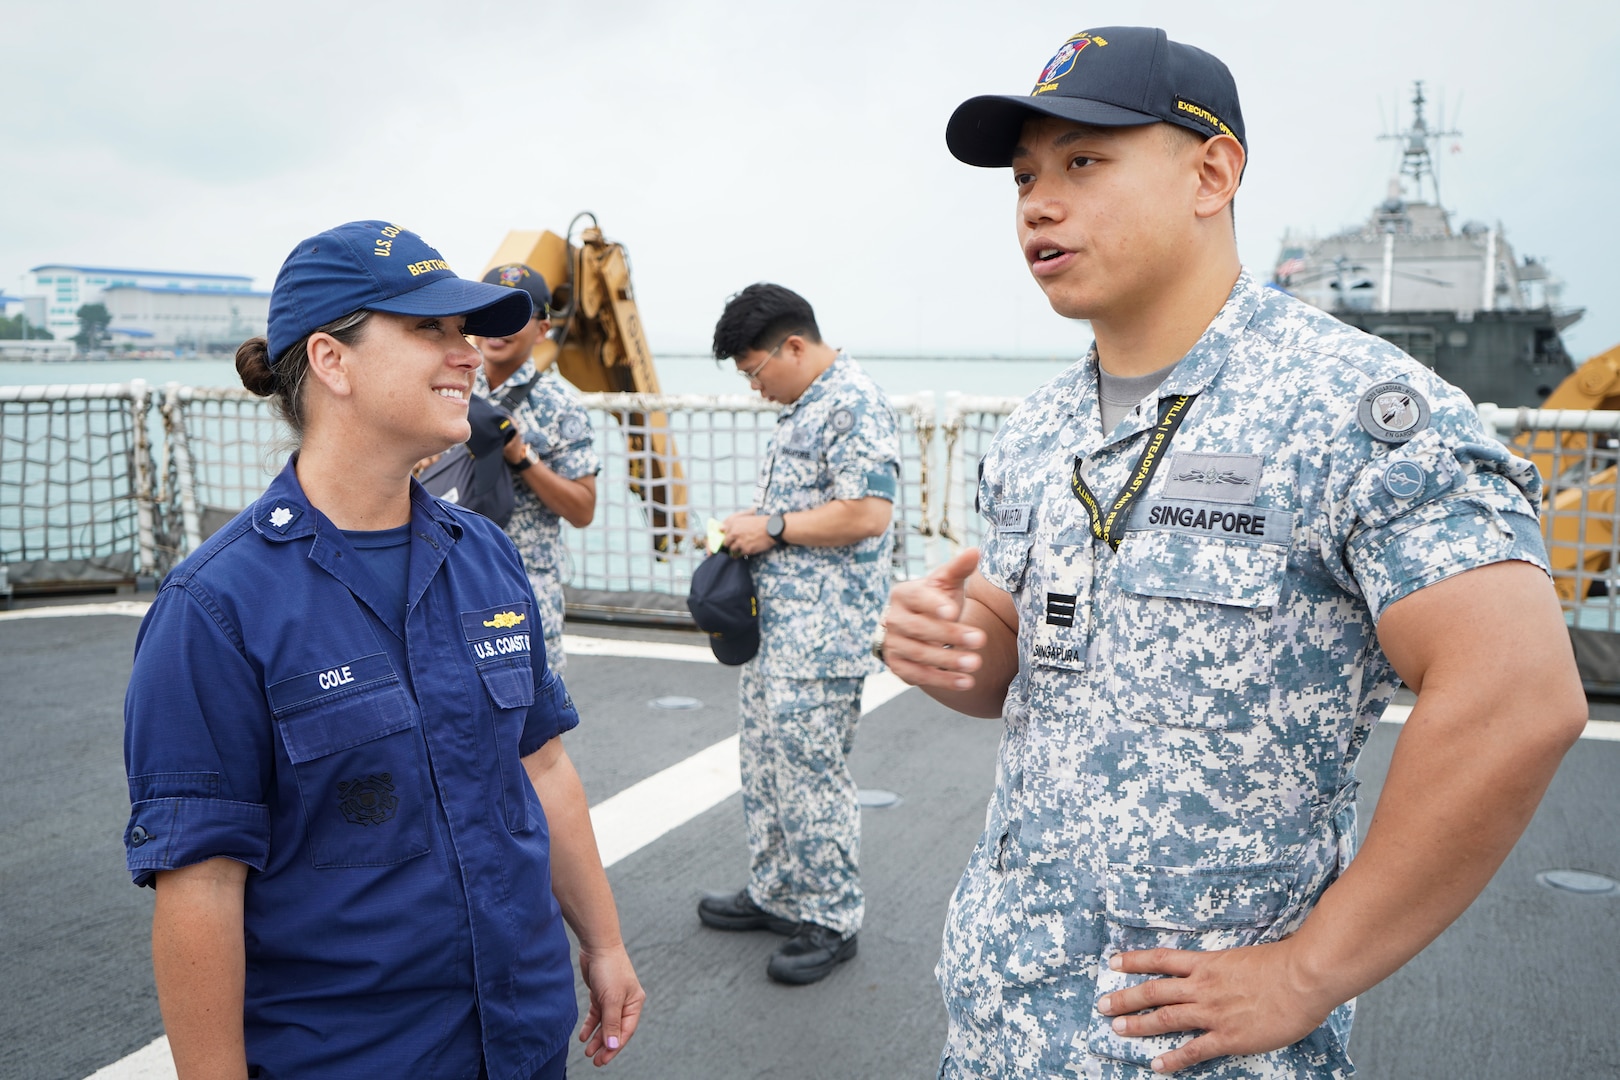 Cmdr. Leah Cole, executive officer, U.S. Coast Guard Cutter Bertholf (WMSL 750), speaks with her counterpart, the executive officer of the Republic of Singapore naval ship, Guardian, while the Bertholf was moored at Changi Naval Base, Feb. 27, 2024. The Navy crewmembers came aboard the Bertholf for a brief tour and to enjoy lunch with the crew. (U.S. Coast Guard photo by Petty Officer Steve Strohmaier)